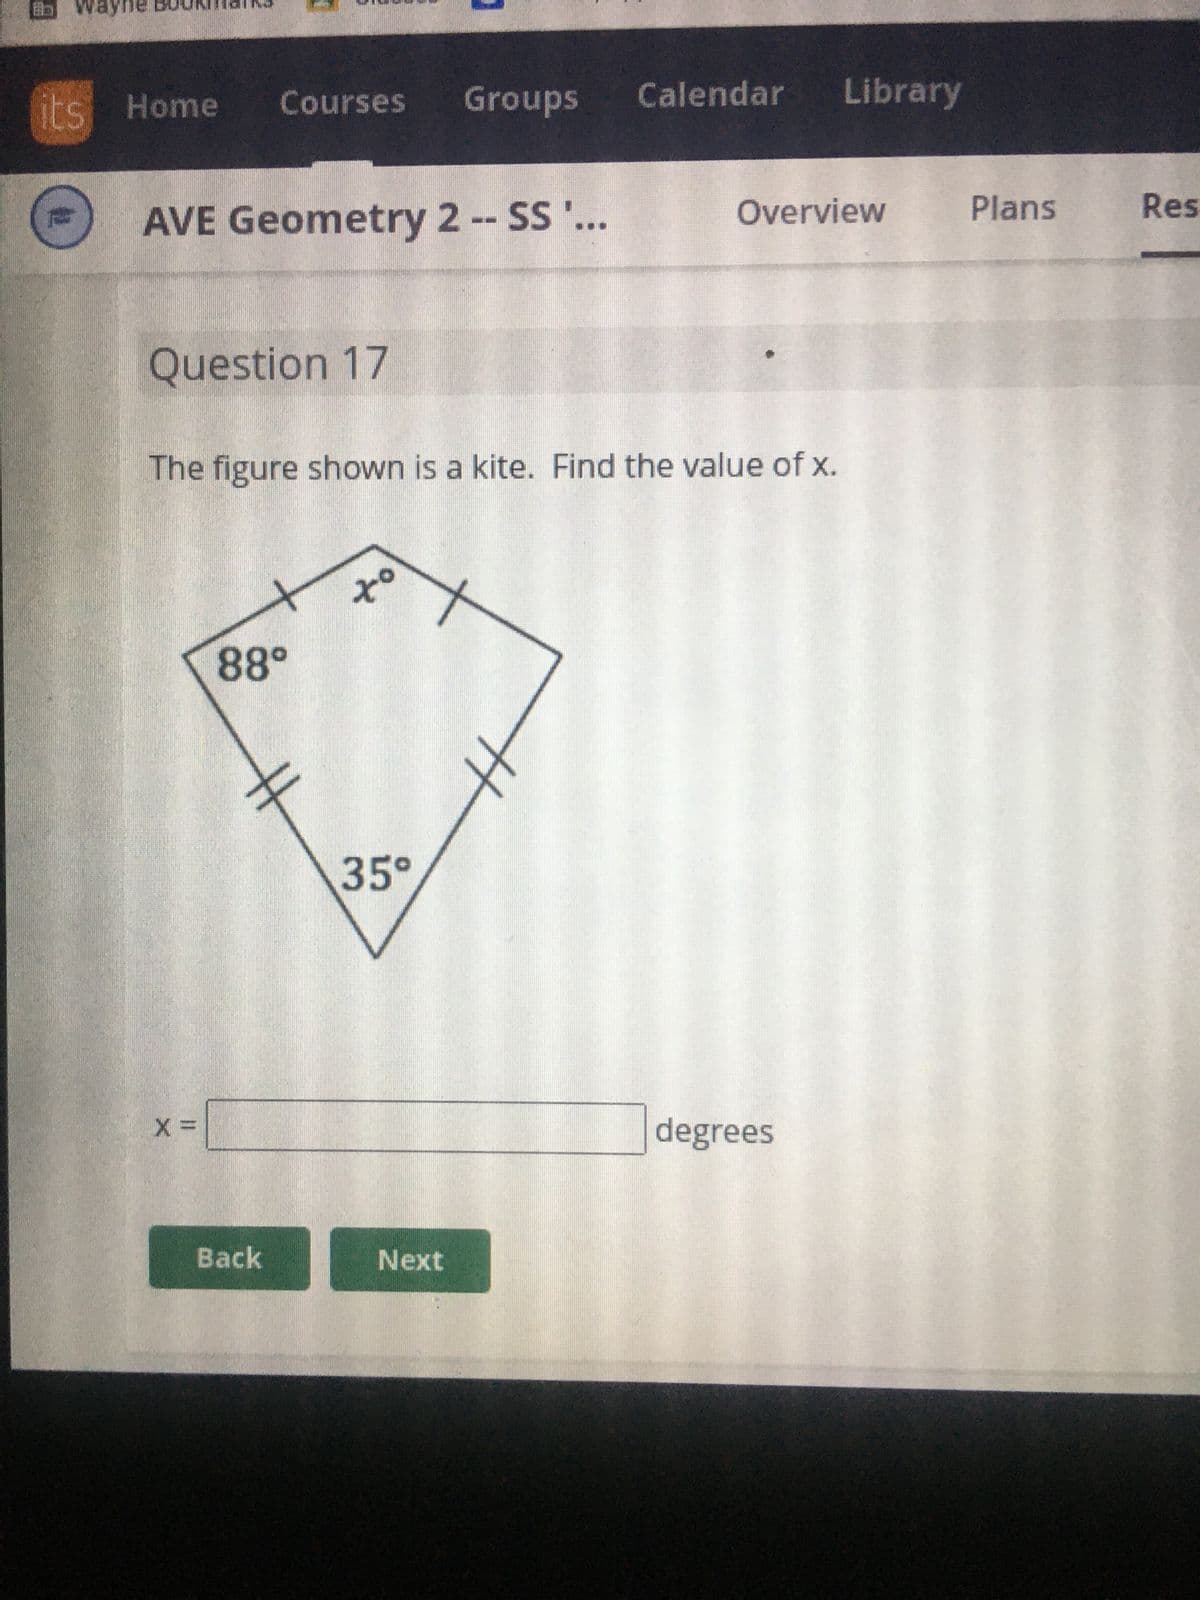 FRED
its Home Courses Groups
AVE Geometry 2 -- SS '...
Question 17
X =
The figure shown is a kite. Find the value of x.
88°
Back
to
35°
Calendar Library
Next
Overview
degrees
Plans
Res